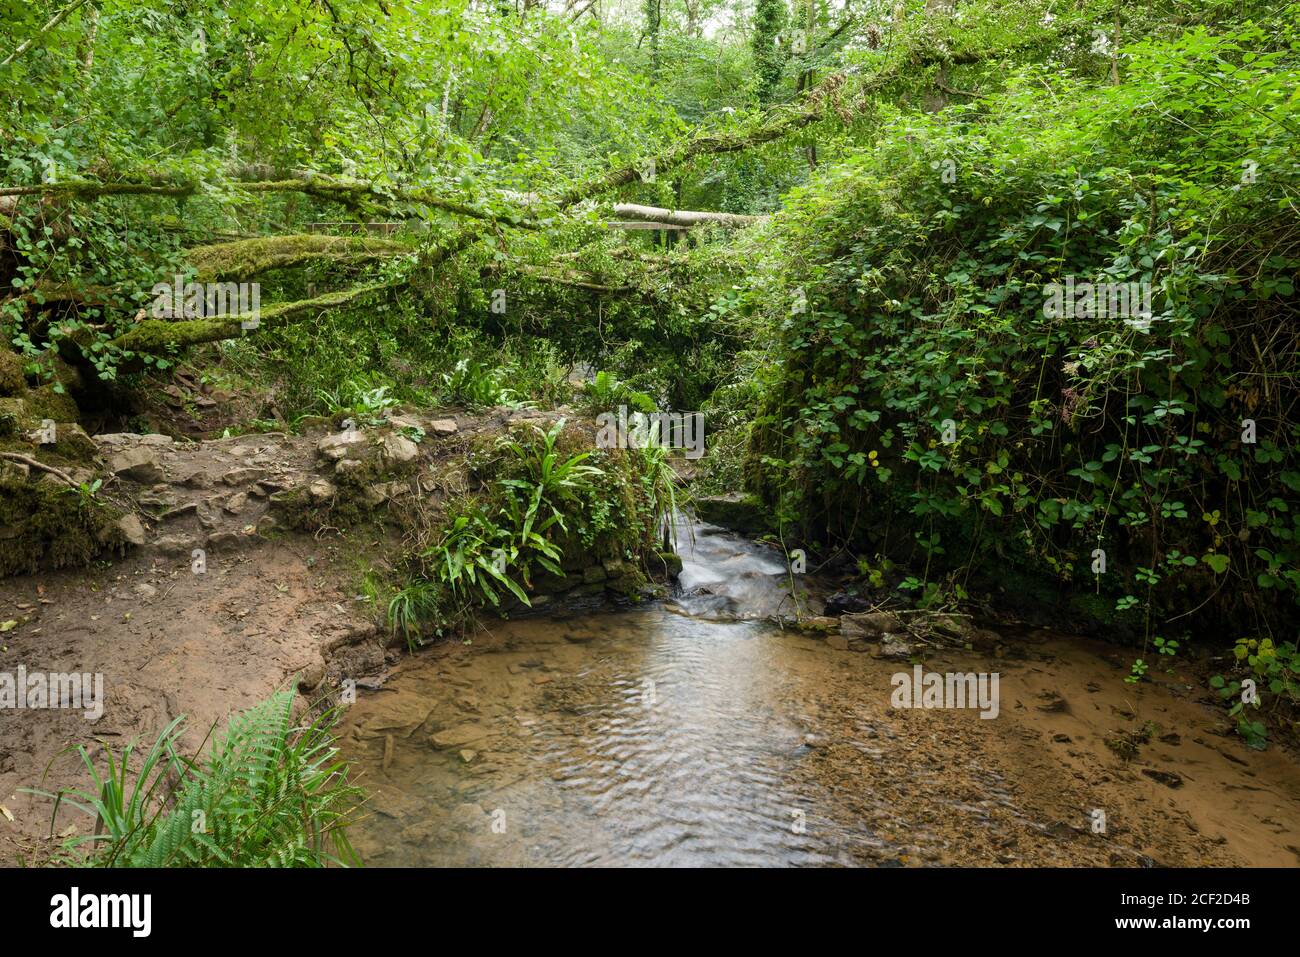 The Mells River over which a European Ash tree fallen due to Ash dieback fungus (Hymenoscyphus fraxineus), Harridge Wood Nature Reserve, Somerset, England. Stock Photo